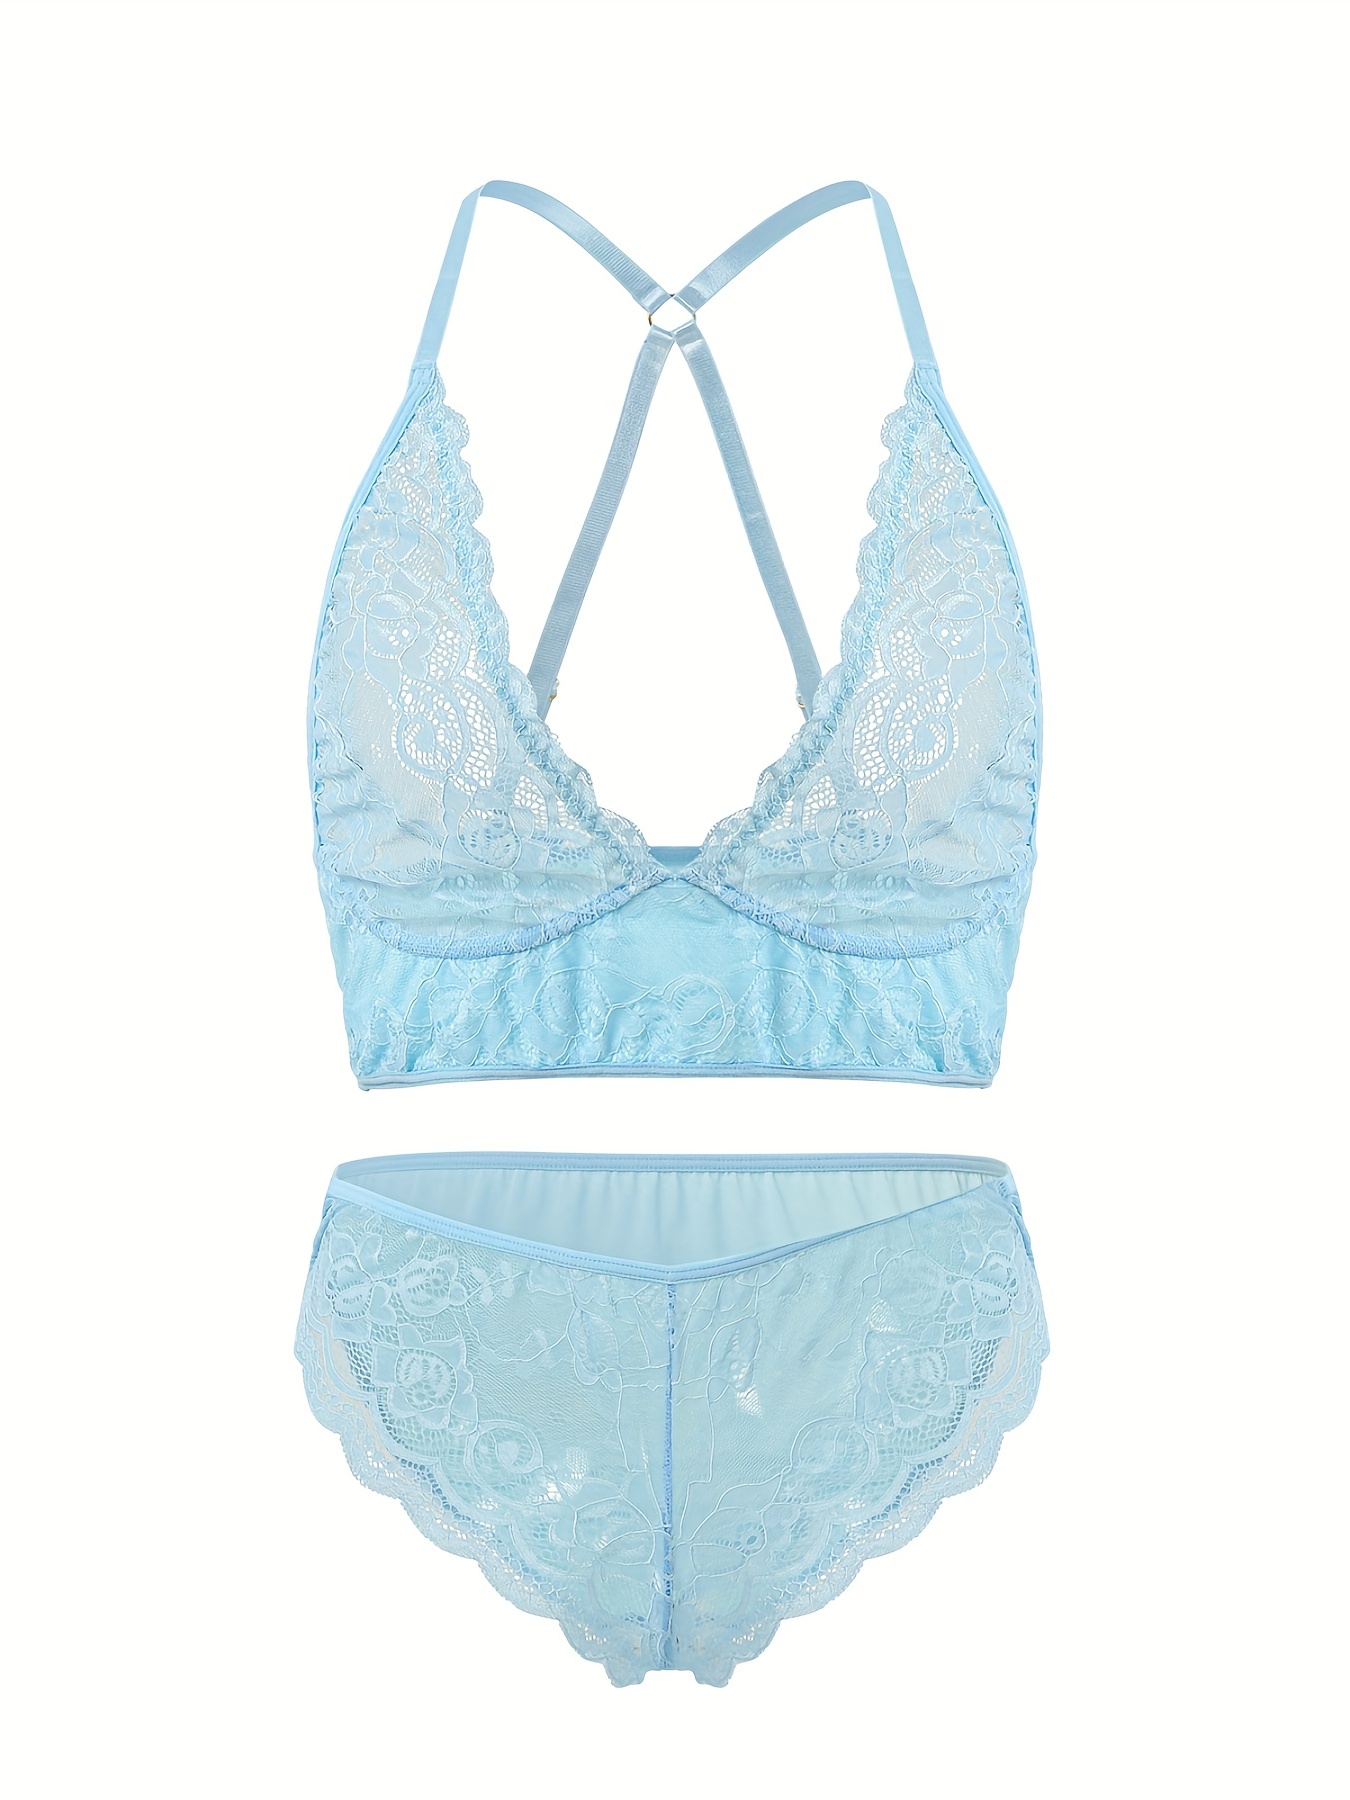 Teal Embroidered Lace Underwired 3 Piece Lingerie Set